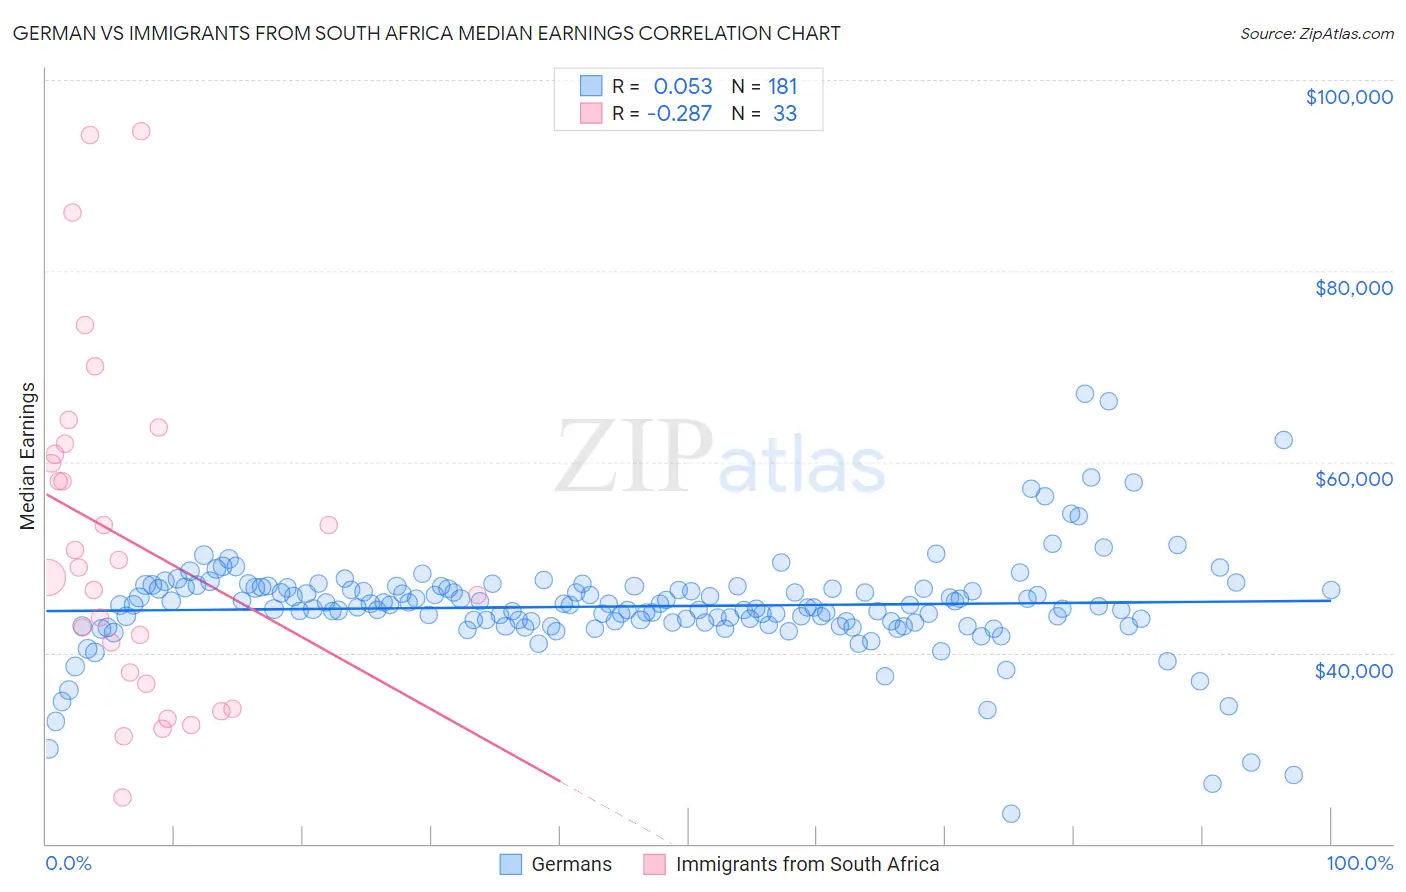 German vs Immigrants from South Africa Median Earnings